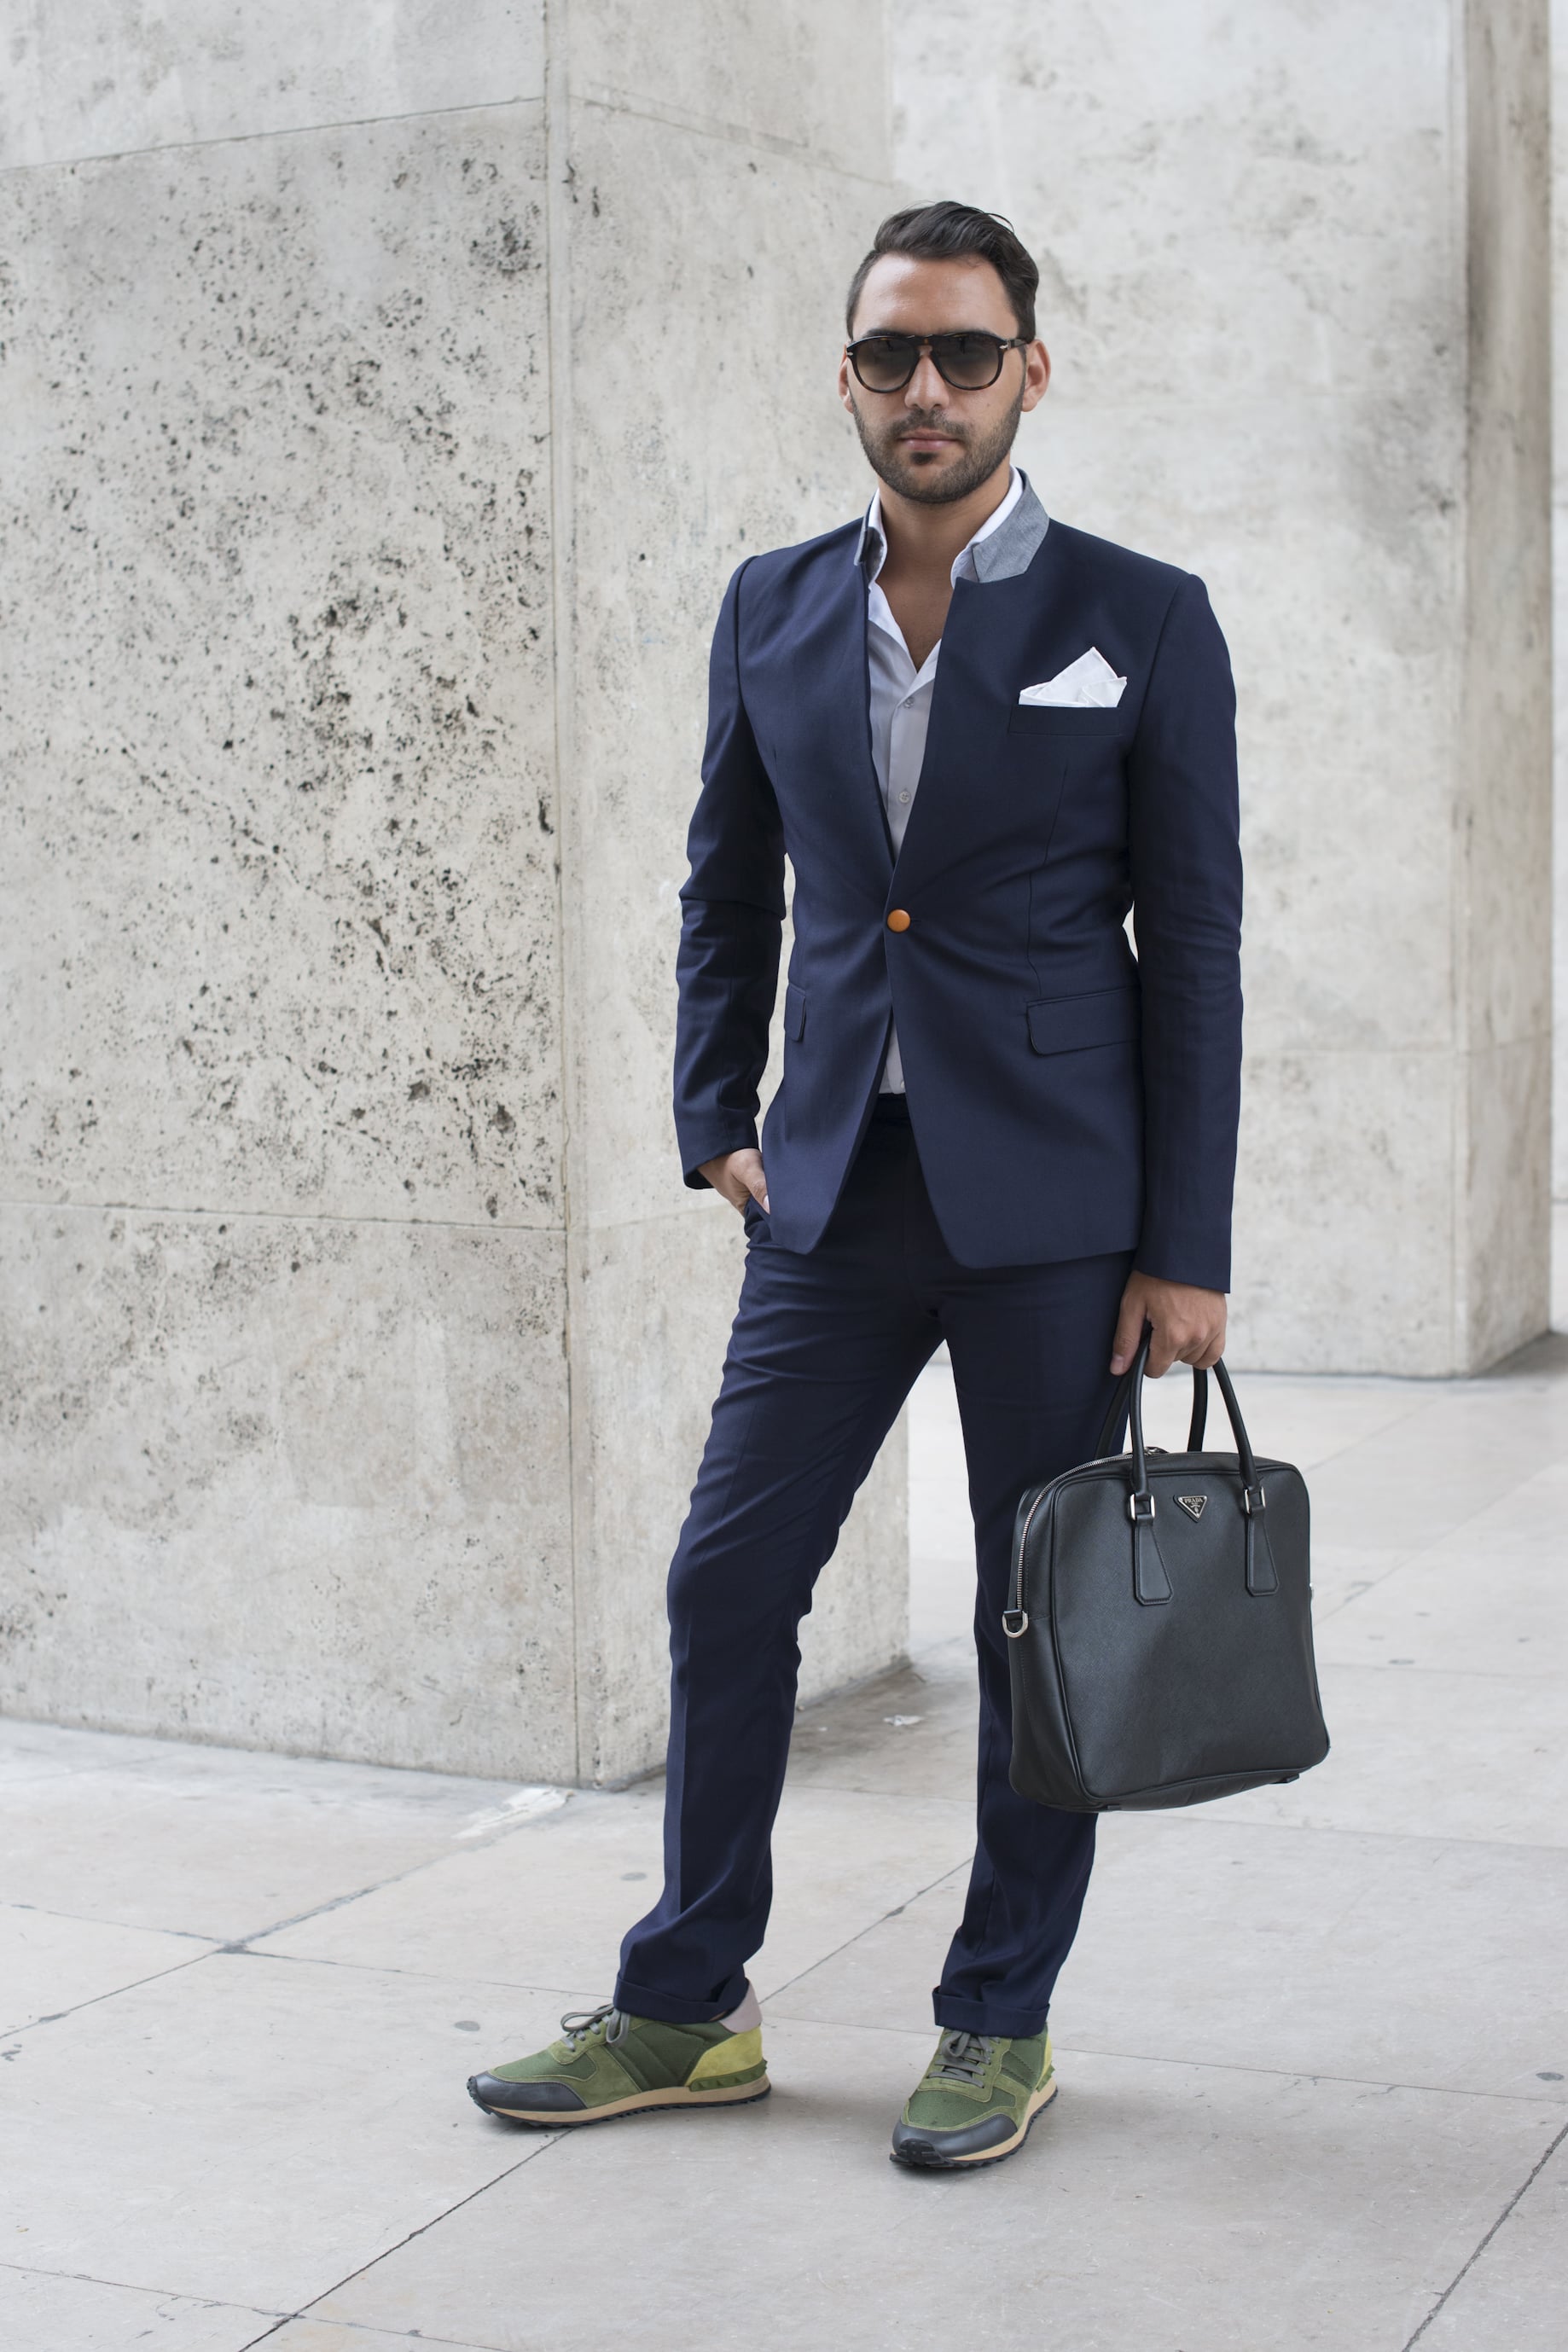 The staid navy suit feels personalized with a pocket square and | His ...